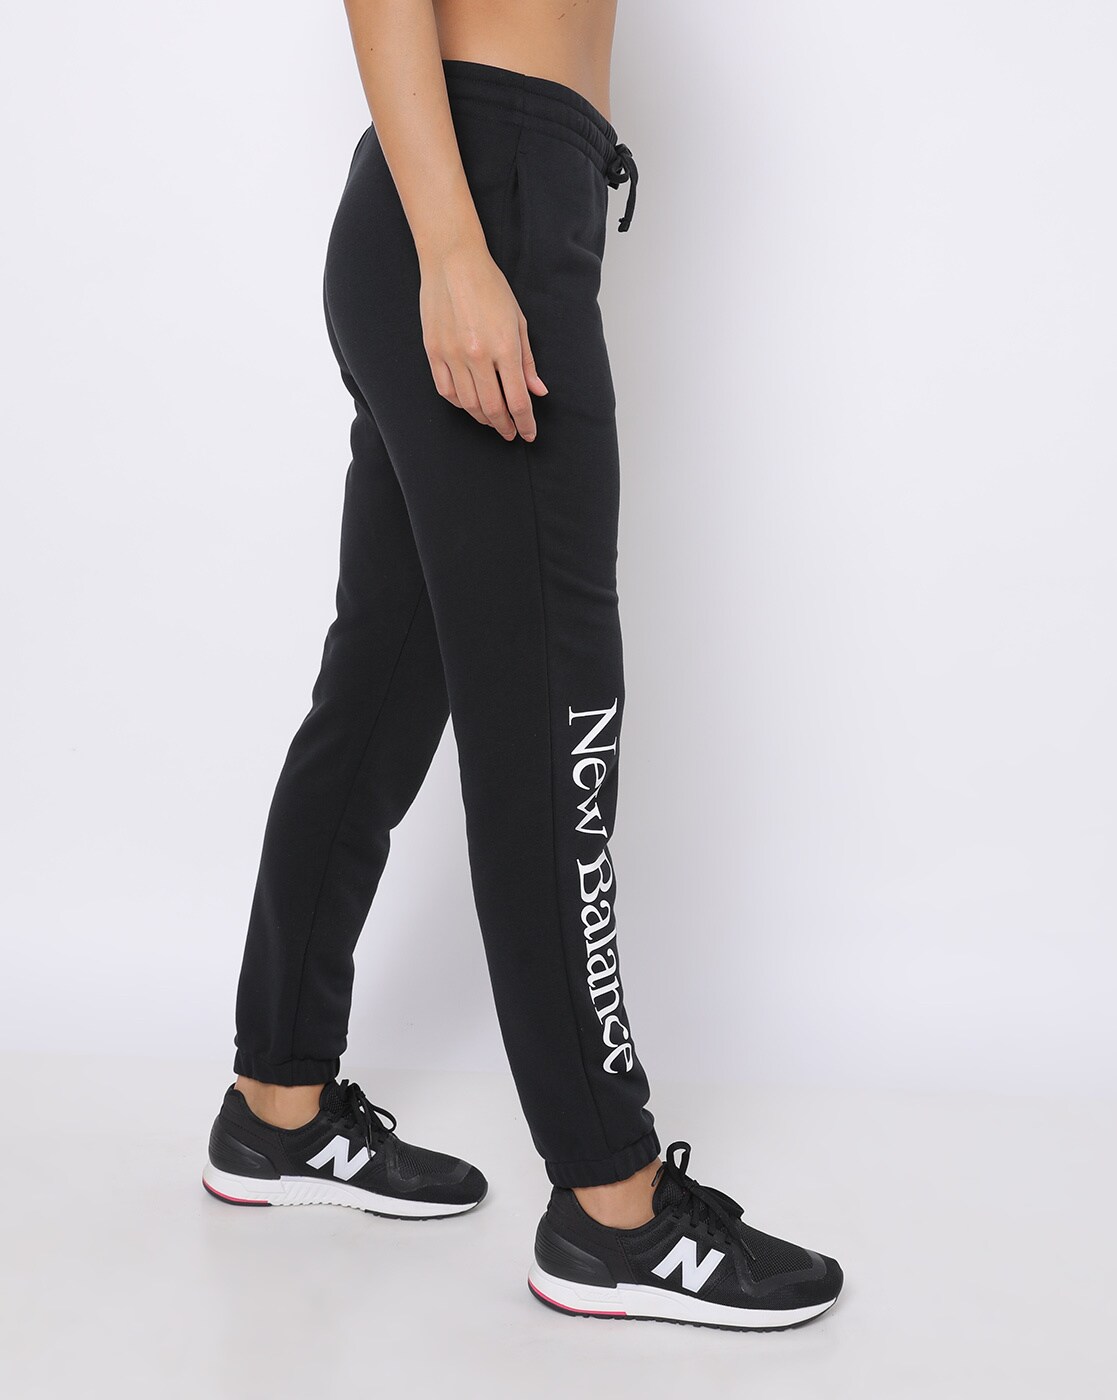 Joggers with Placement Brand Print